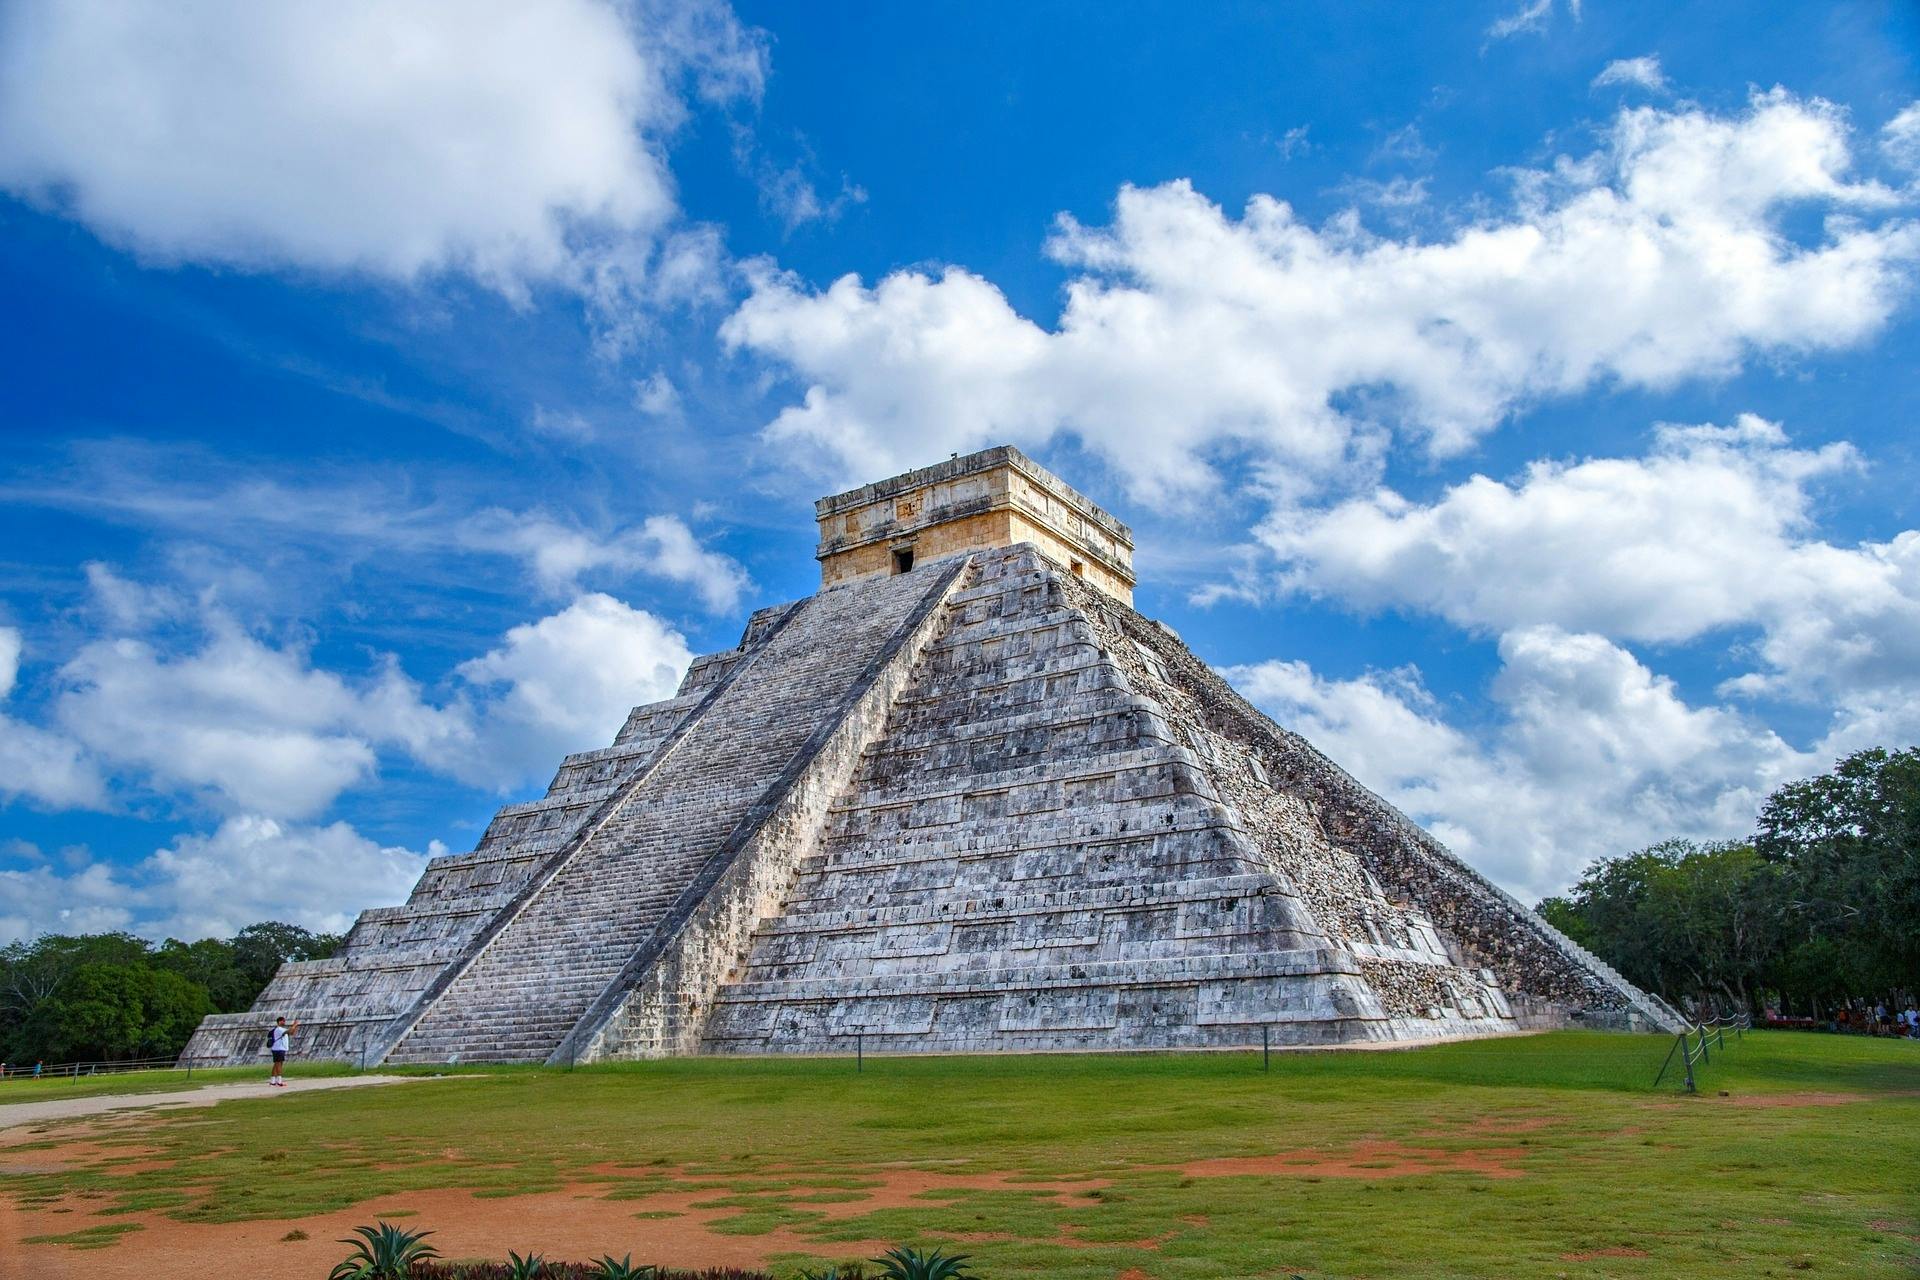 Chichen Itza early access, Ek Balam, and cenote guided tour